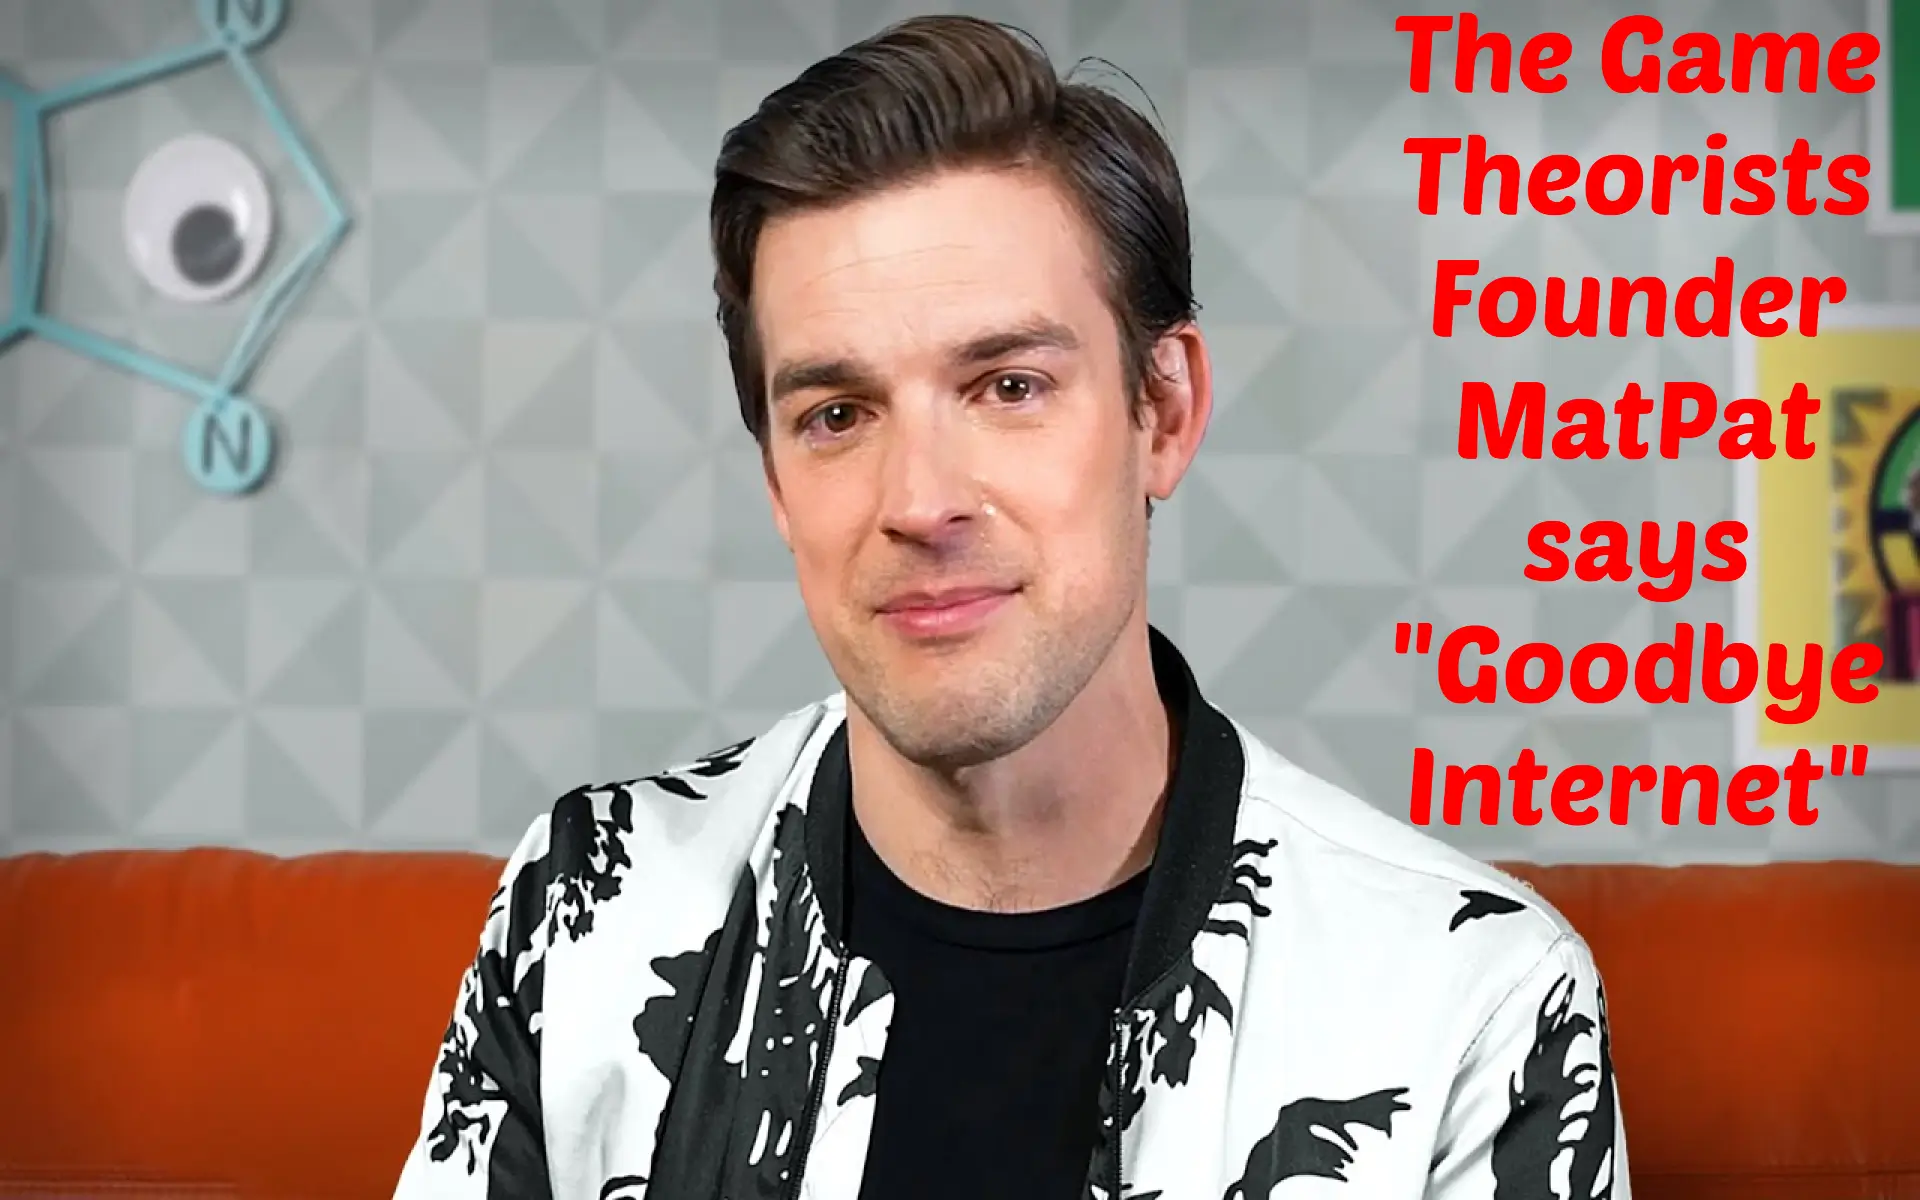 The Game Theorists Founder Matpat